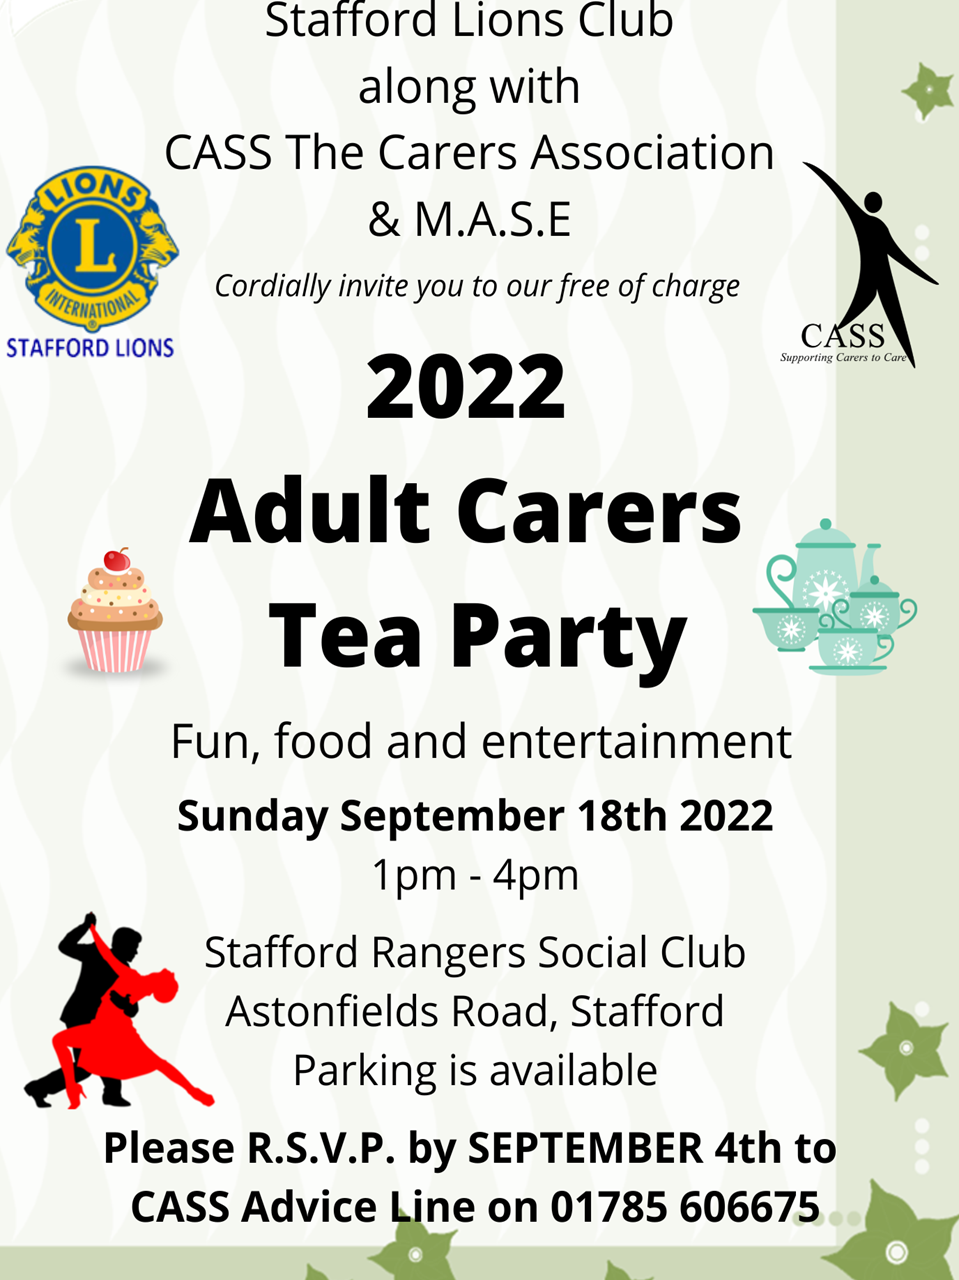 Adult Carers 2022 Tea Party